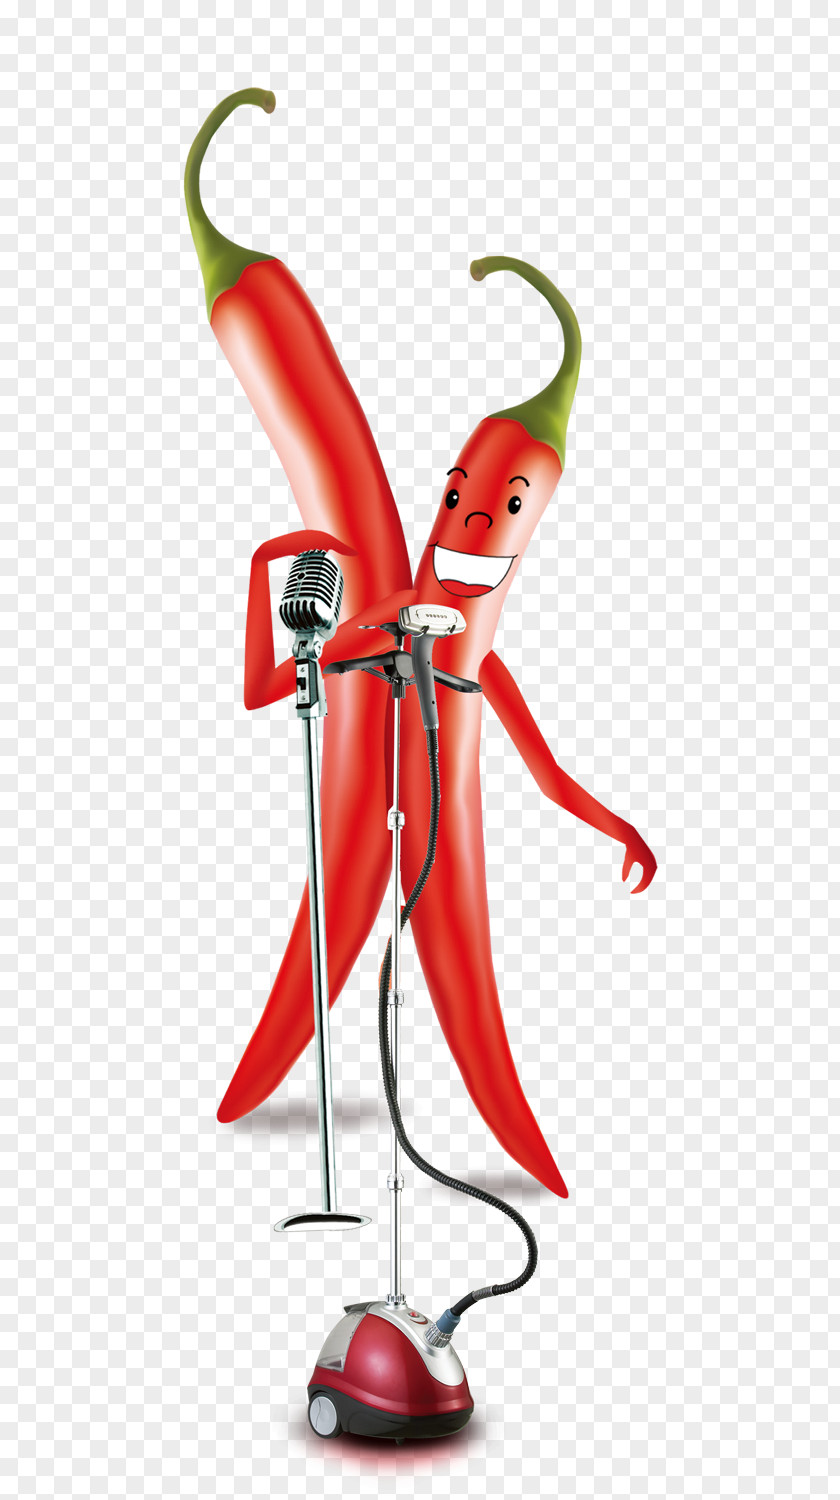 Beautiful People Singing Cartoon Chili Pepper Con Carne Bell PNG